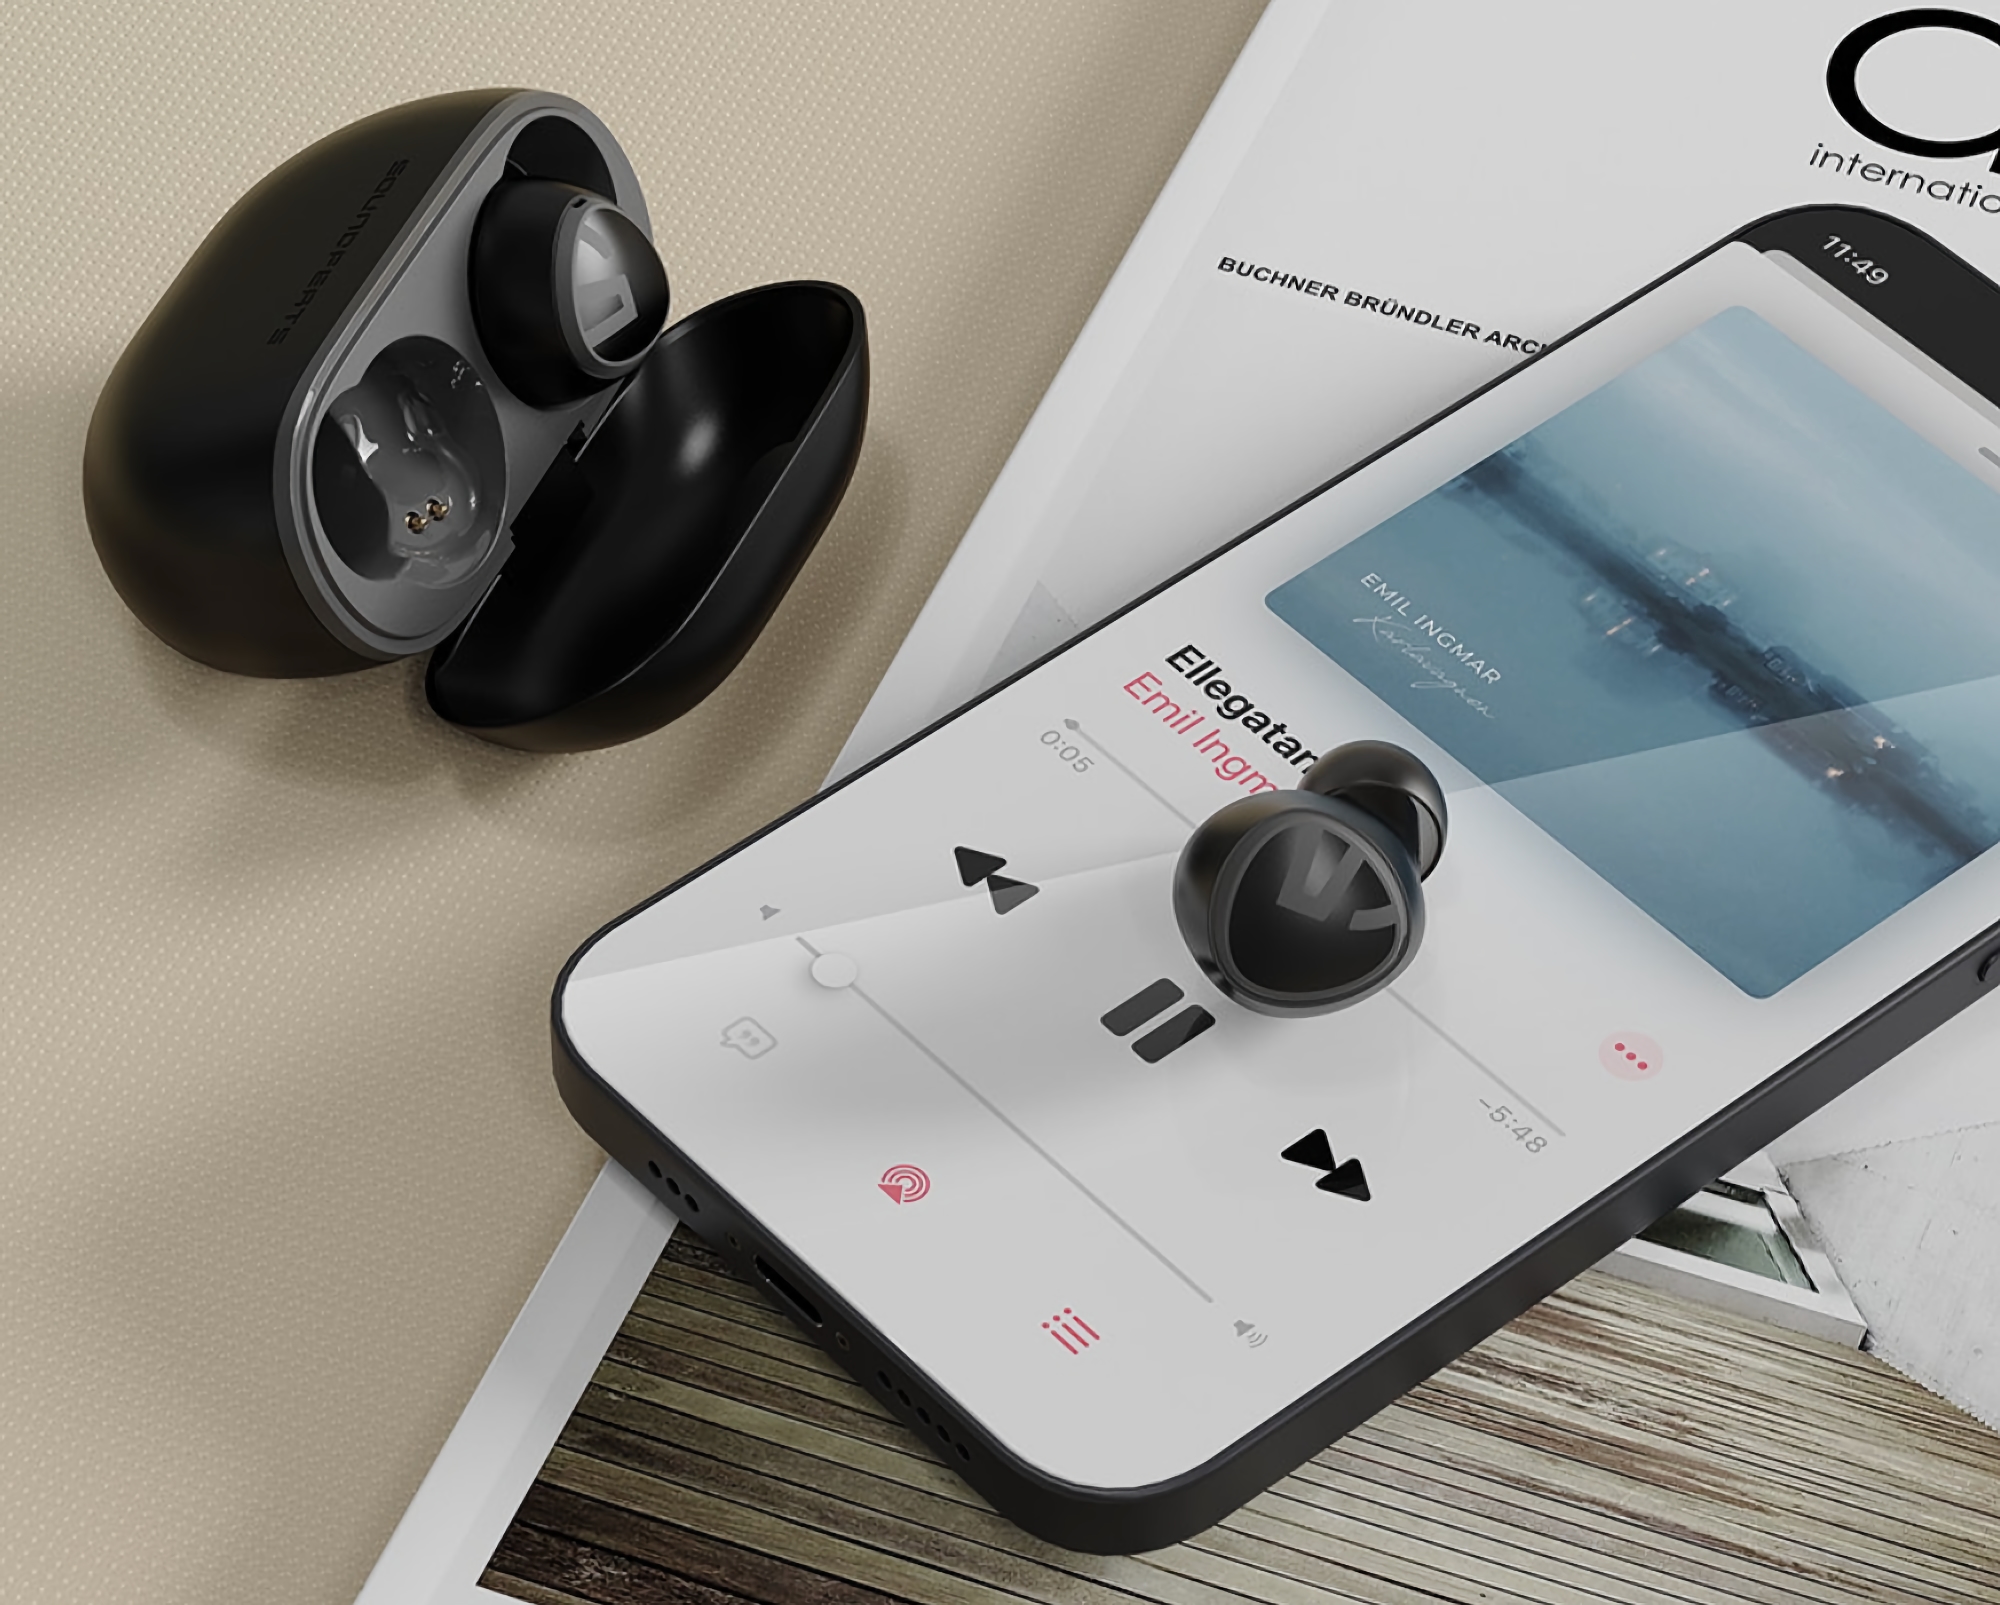 Soundpeats Mini: TWS headphones with IPX5 protection, Bluetooth 5.2 and autonomy up to 20 hours for $27